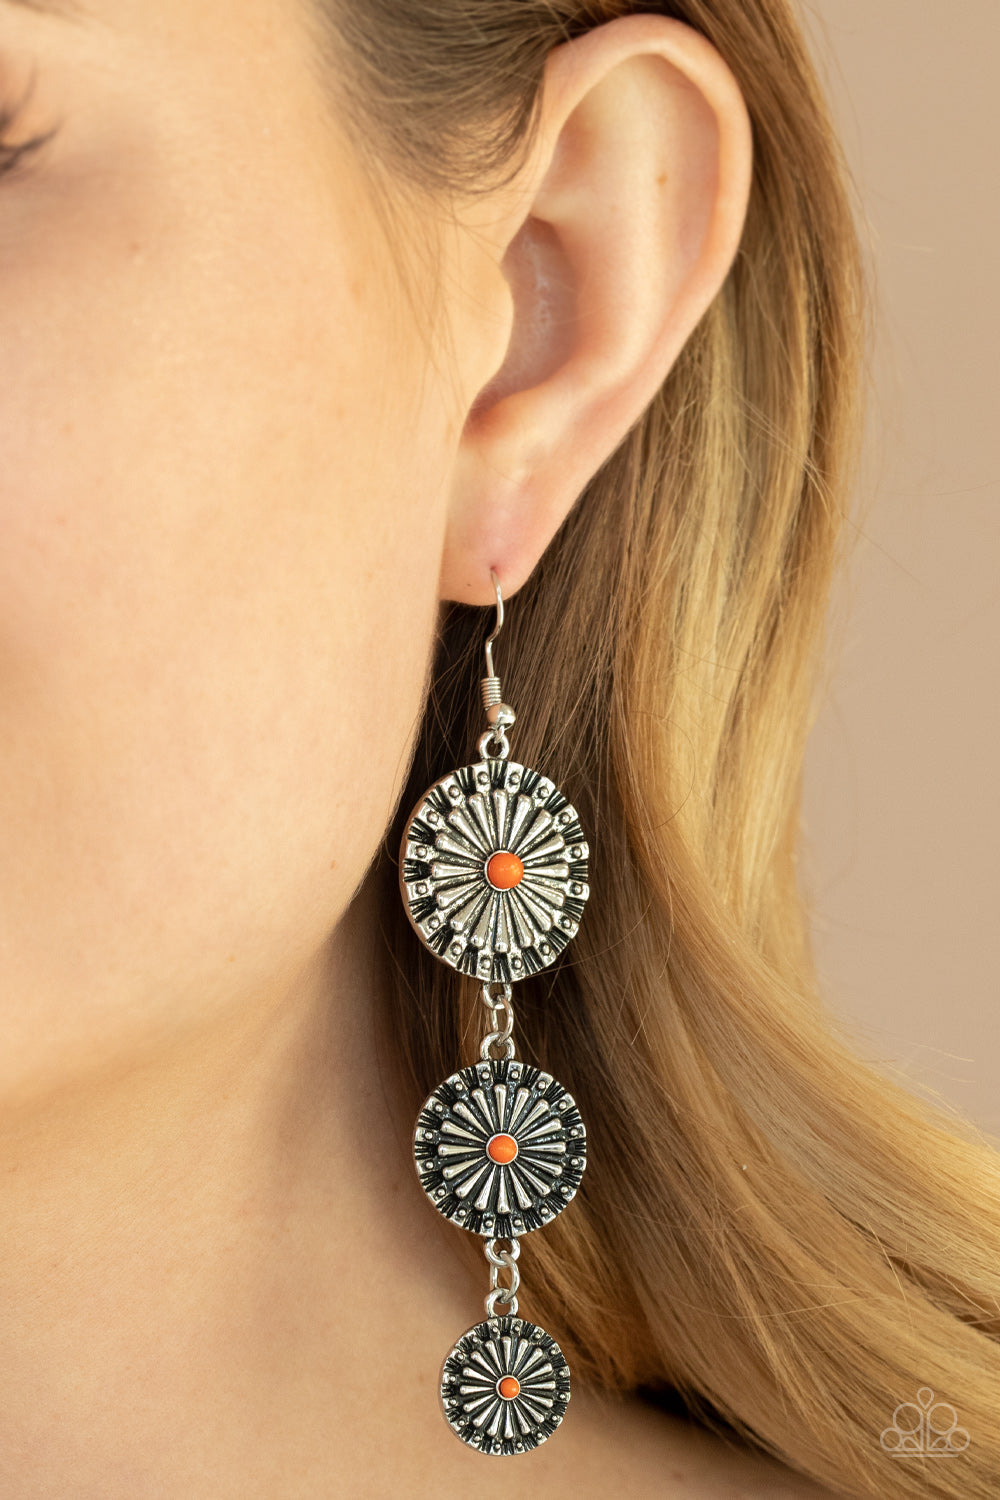 Festively Floral - Orange and Silver Earrings - Paparazzi Accessories - Dotted with dainty orange beads, rustic silver floral frames gradually decrease in size as they swing from the ear, creating a colorful lure. Earring attaches to a standard fishhook fitting. Sold as one pair of earrings.